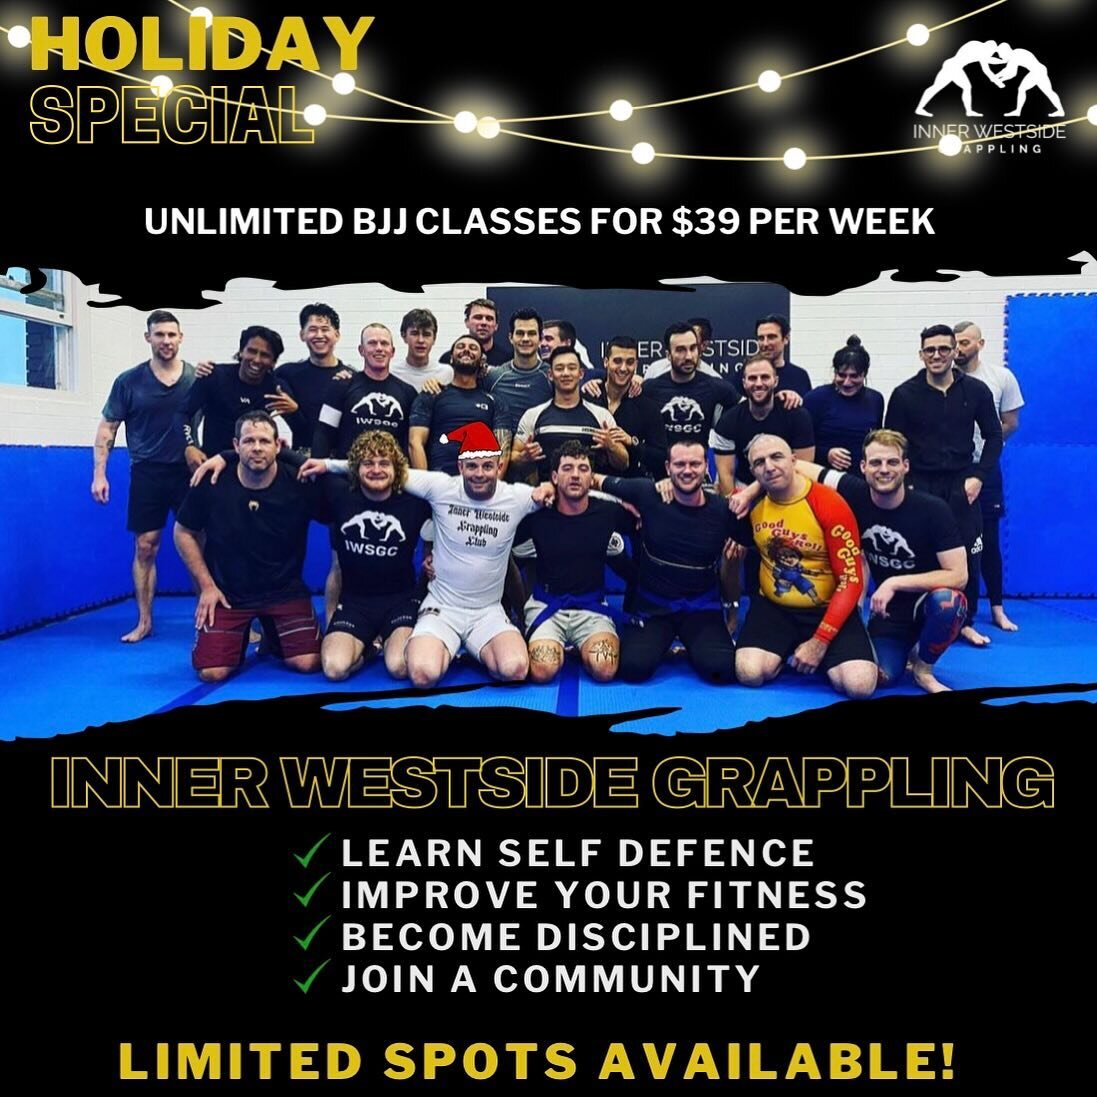 Sign up now and join the BJJ family at Inner Westside Grappling Club!